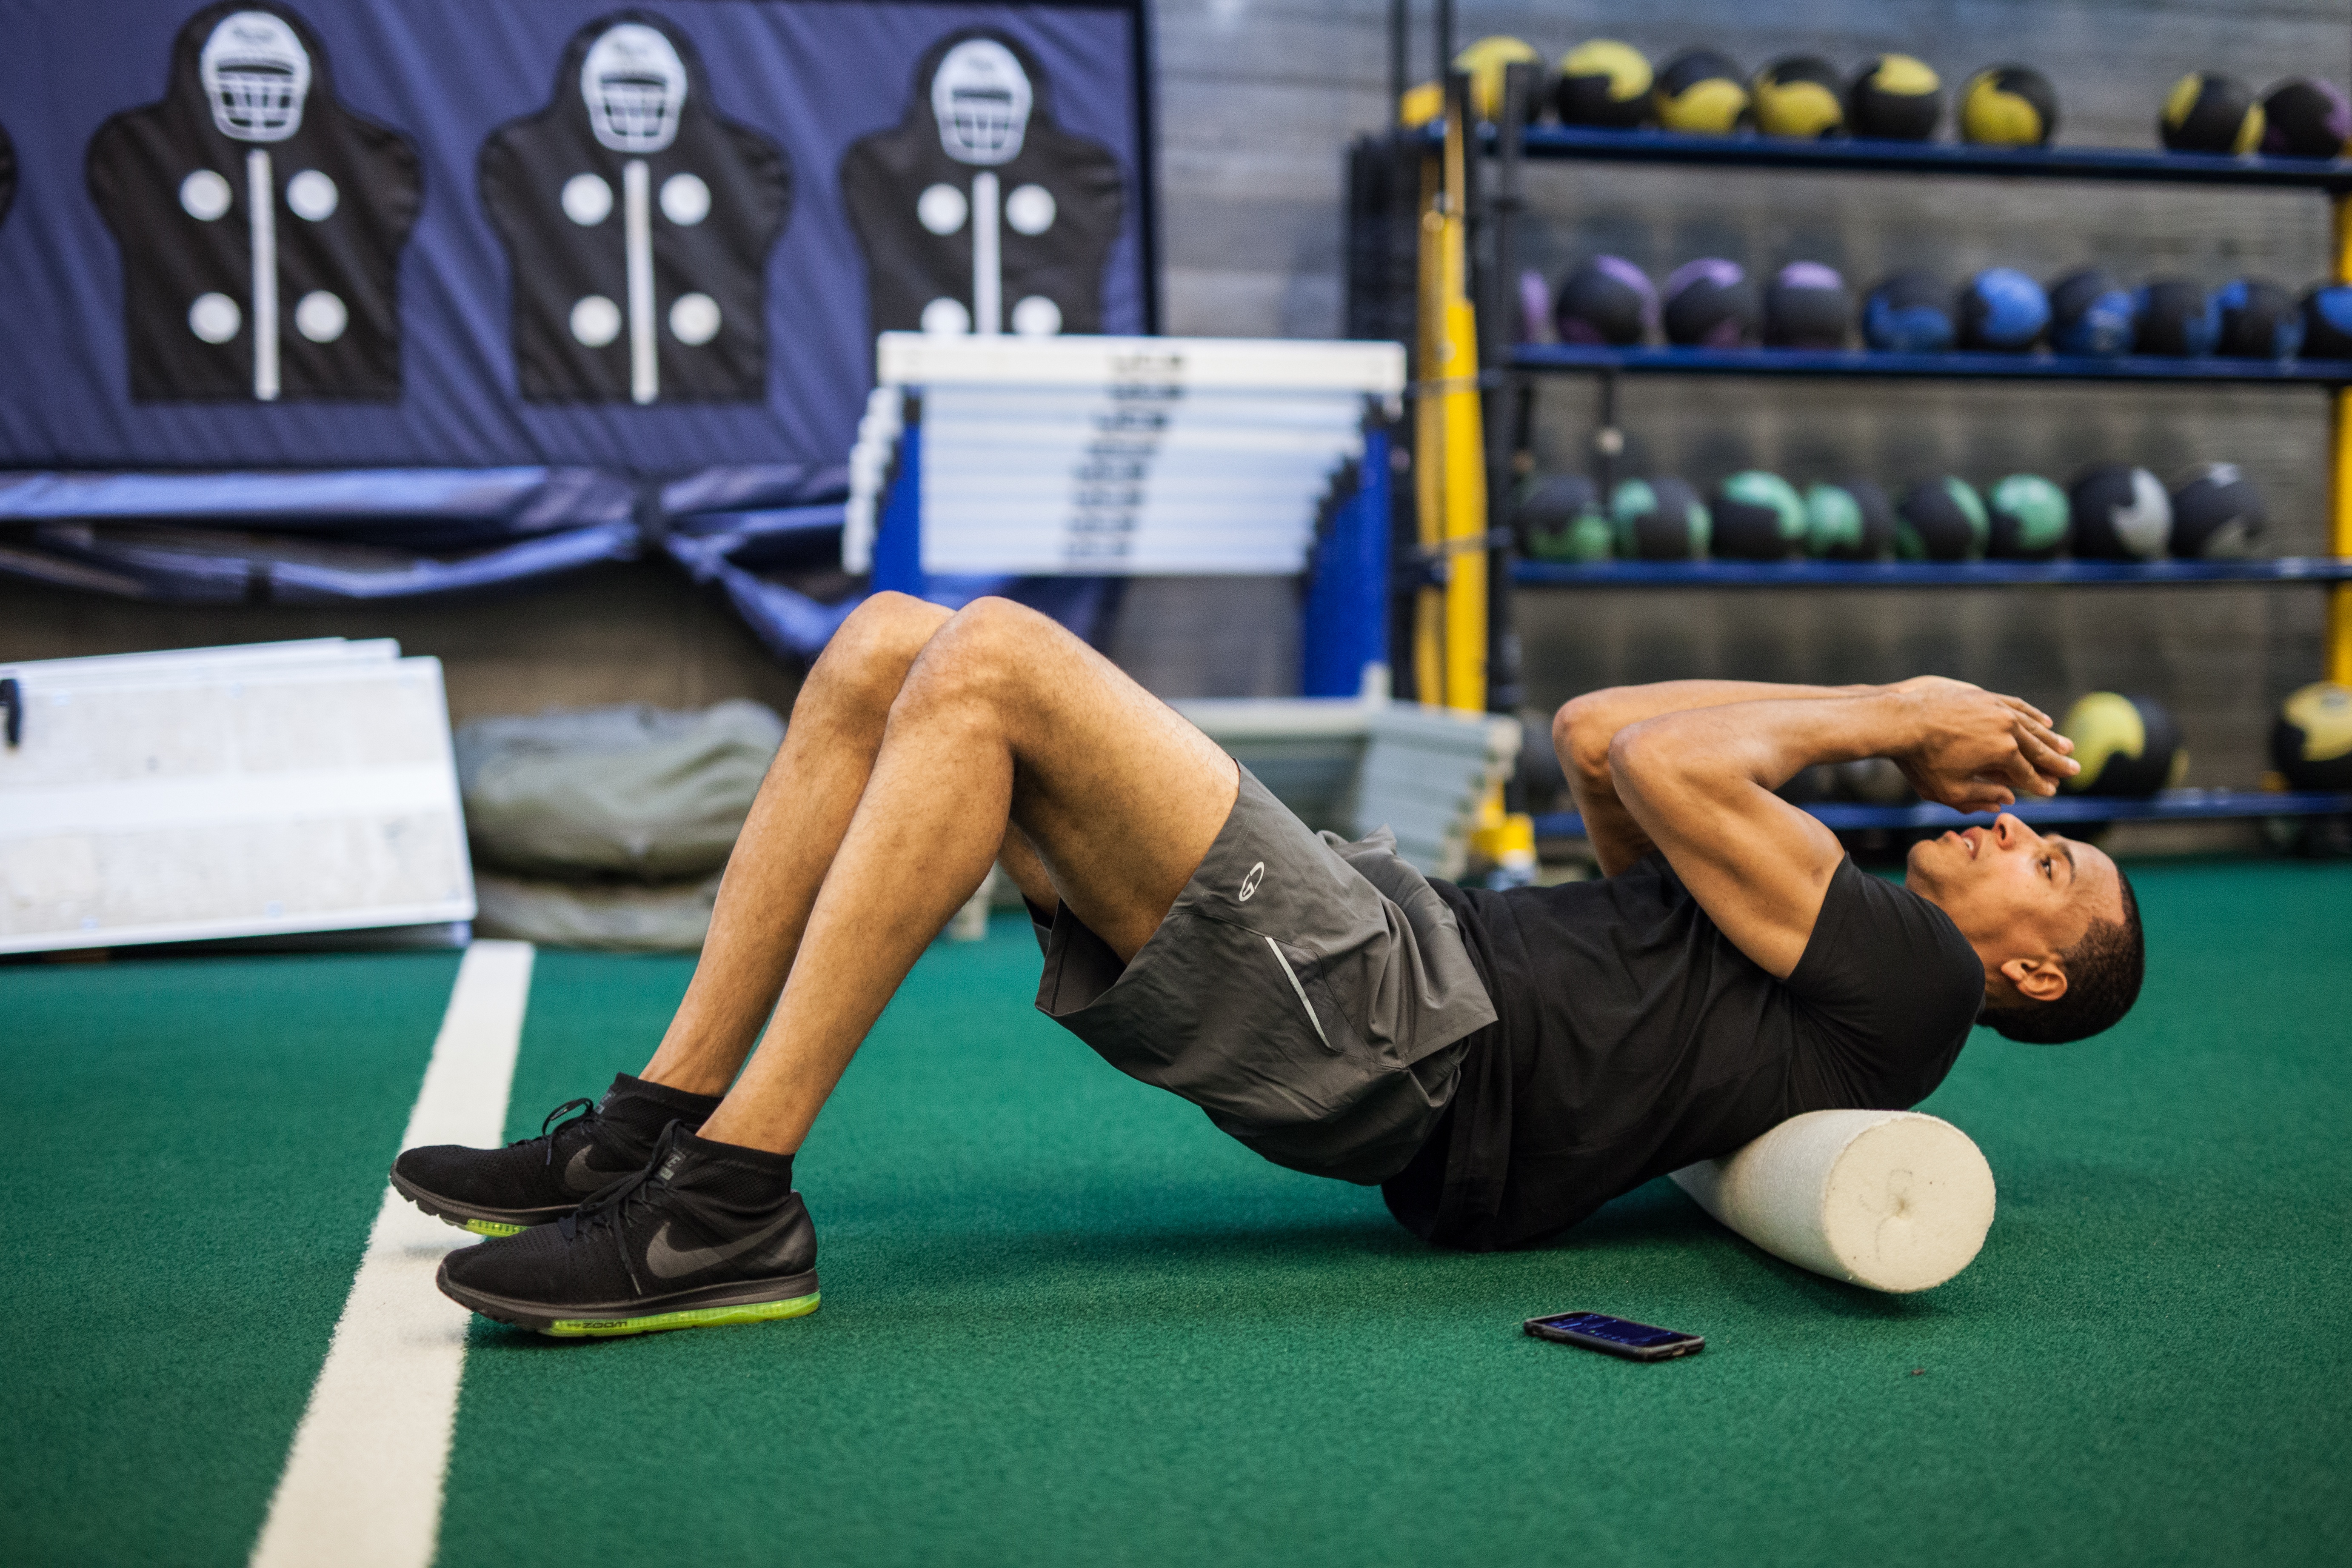 The Athlete's Guide to Foam Rolling